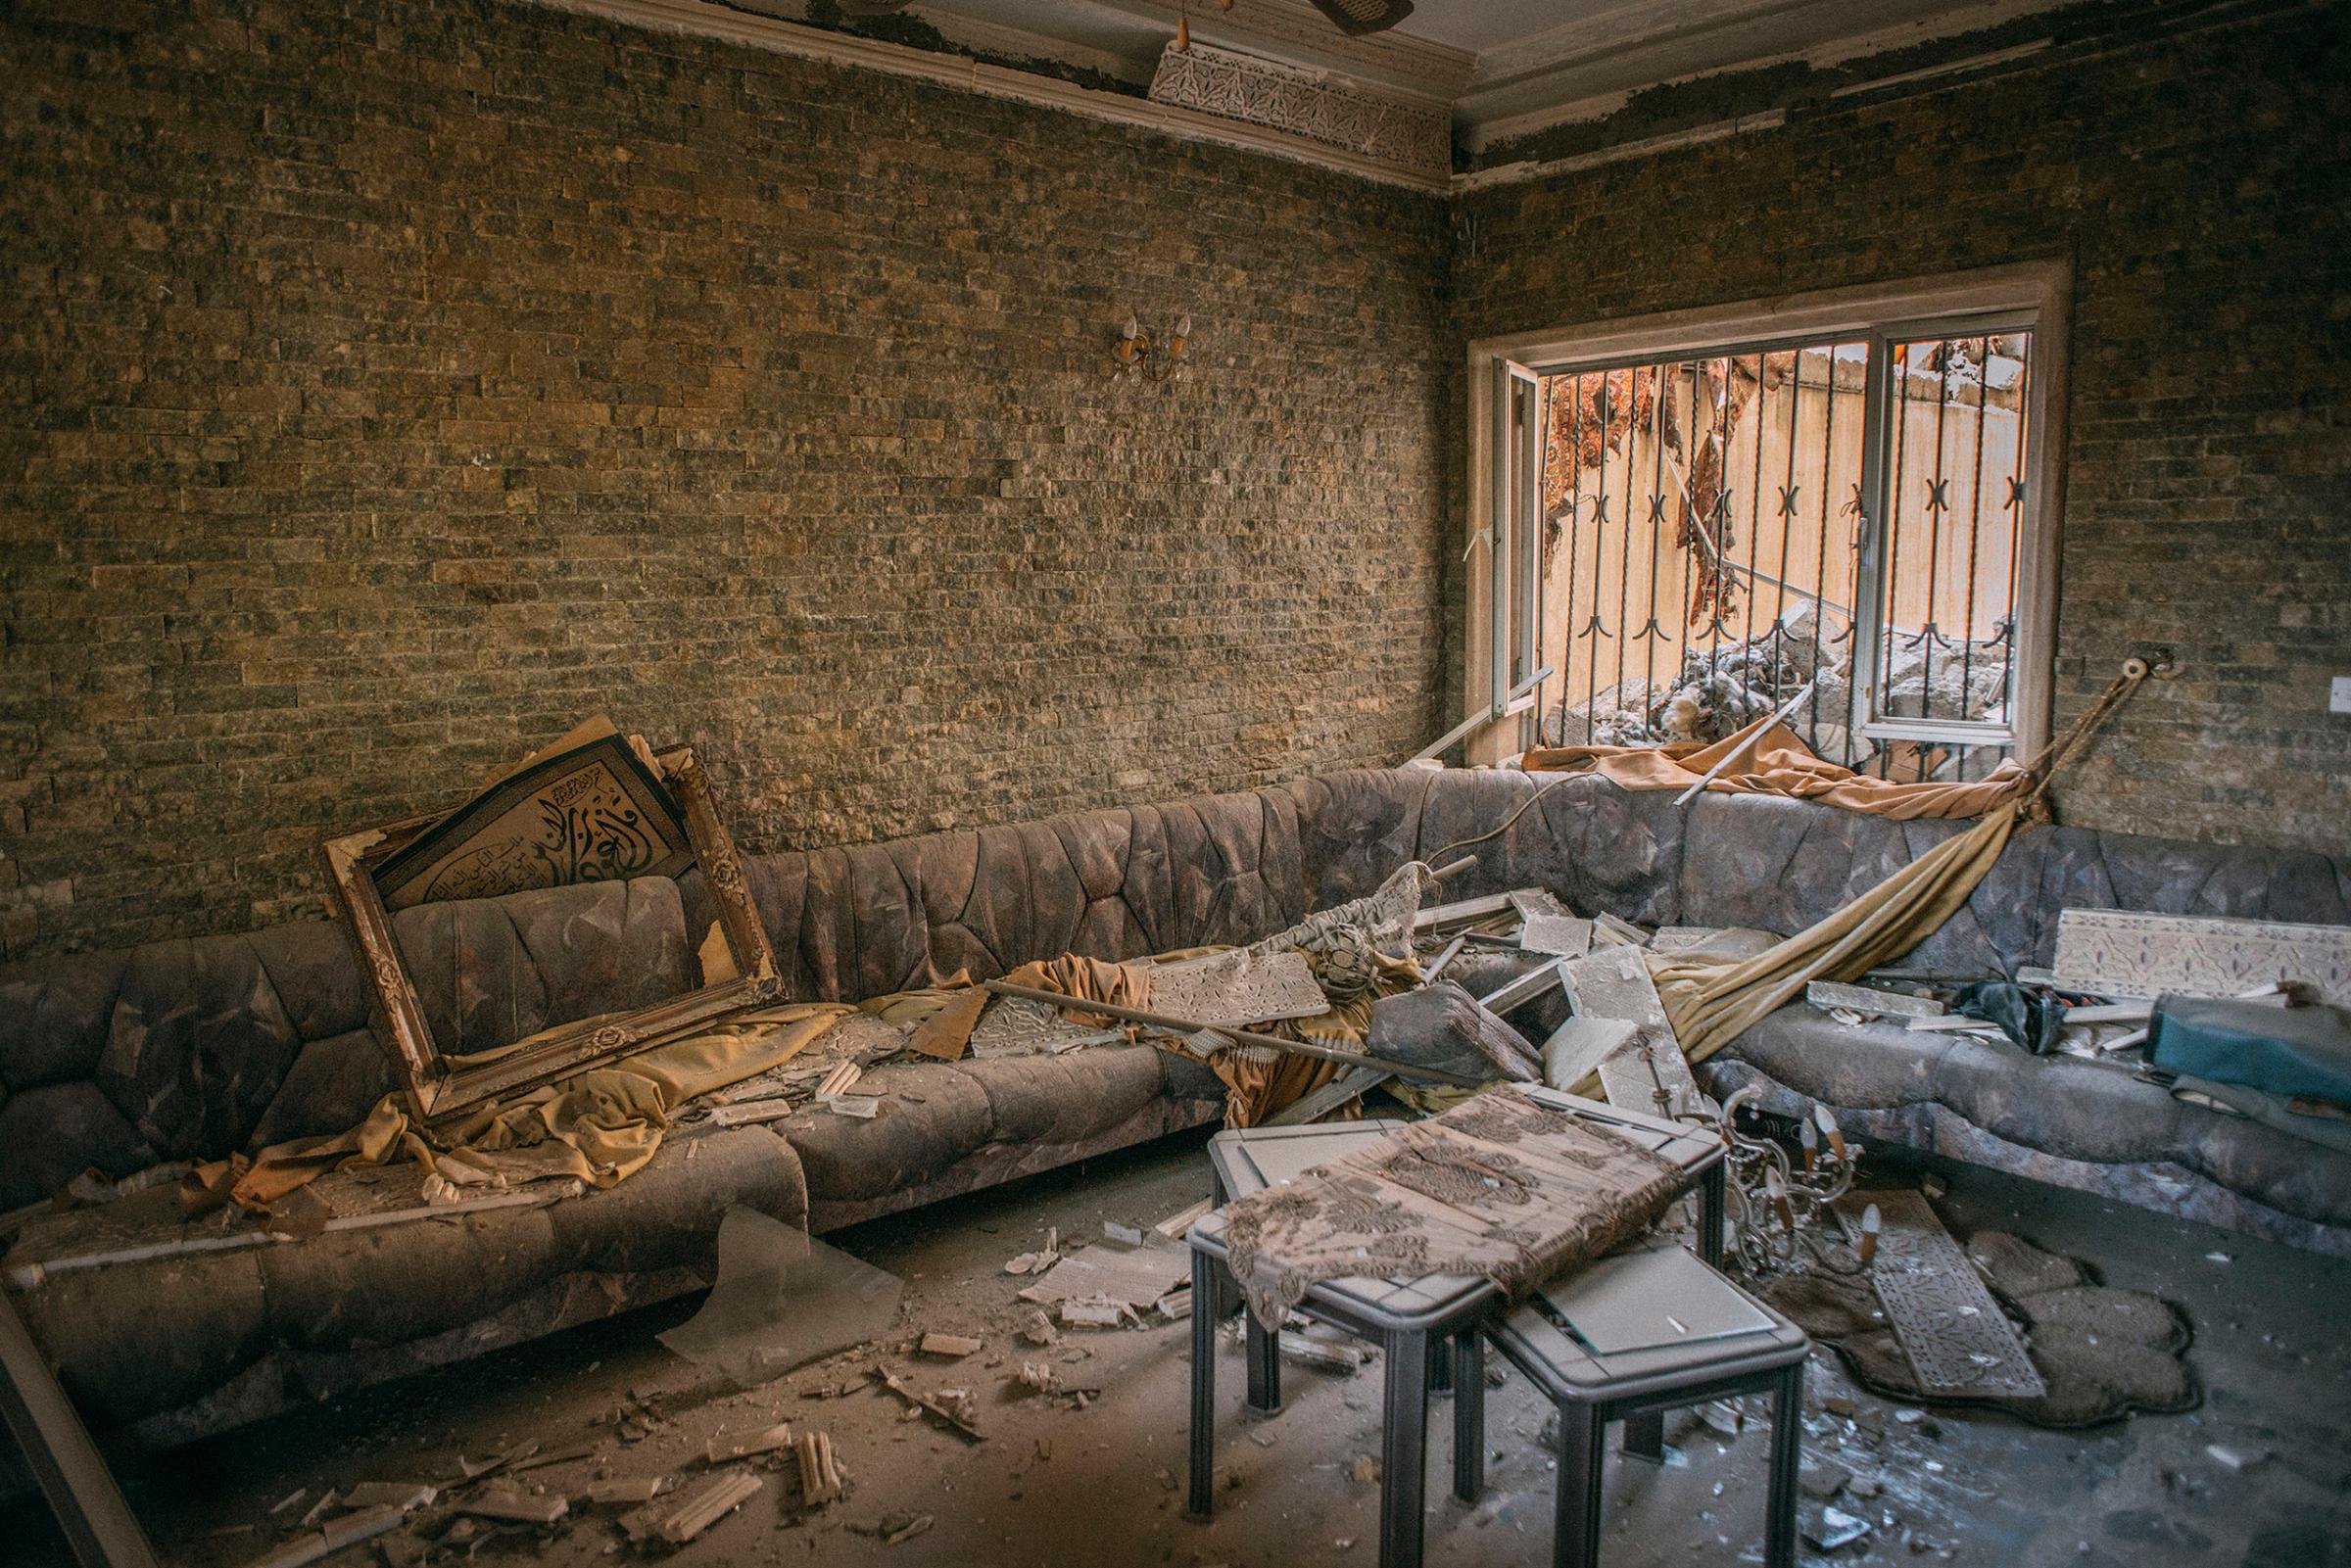 A room inside the home of Median Hikmat al-Galou that was ravaged during a February battle between Iraqi forces and ISIS in southwest Mosul.